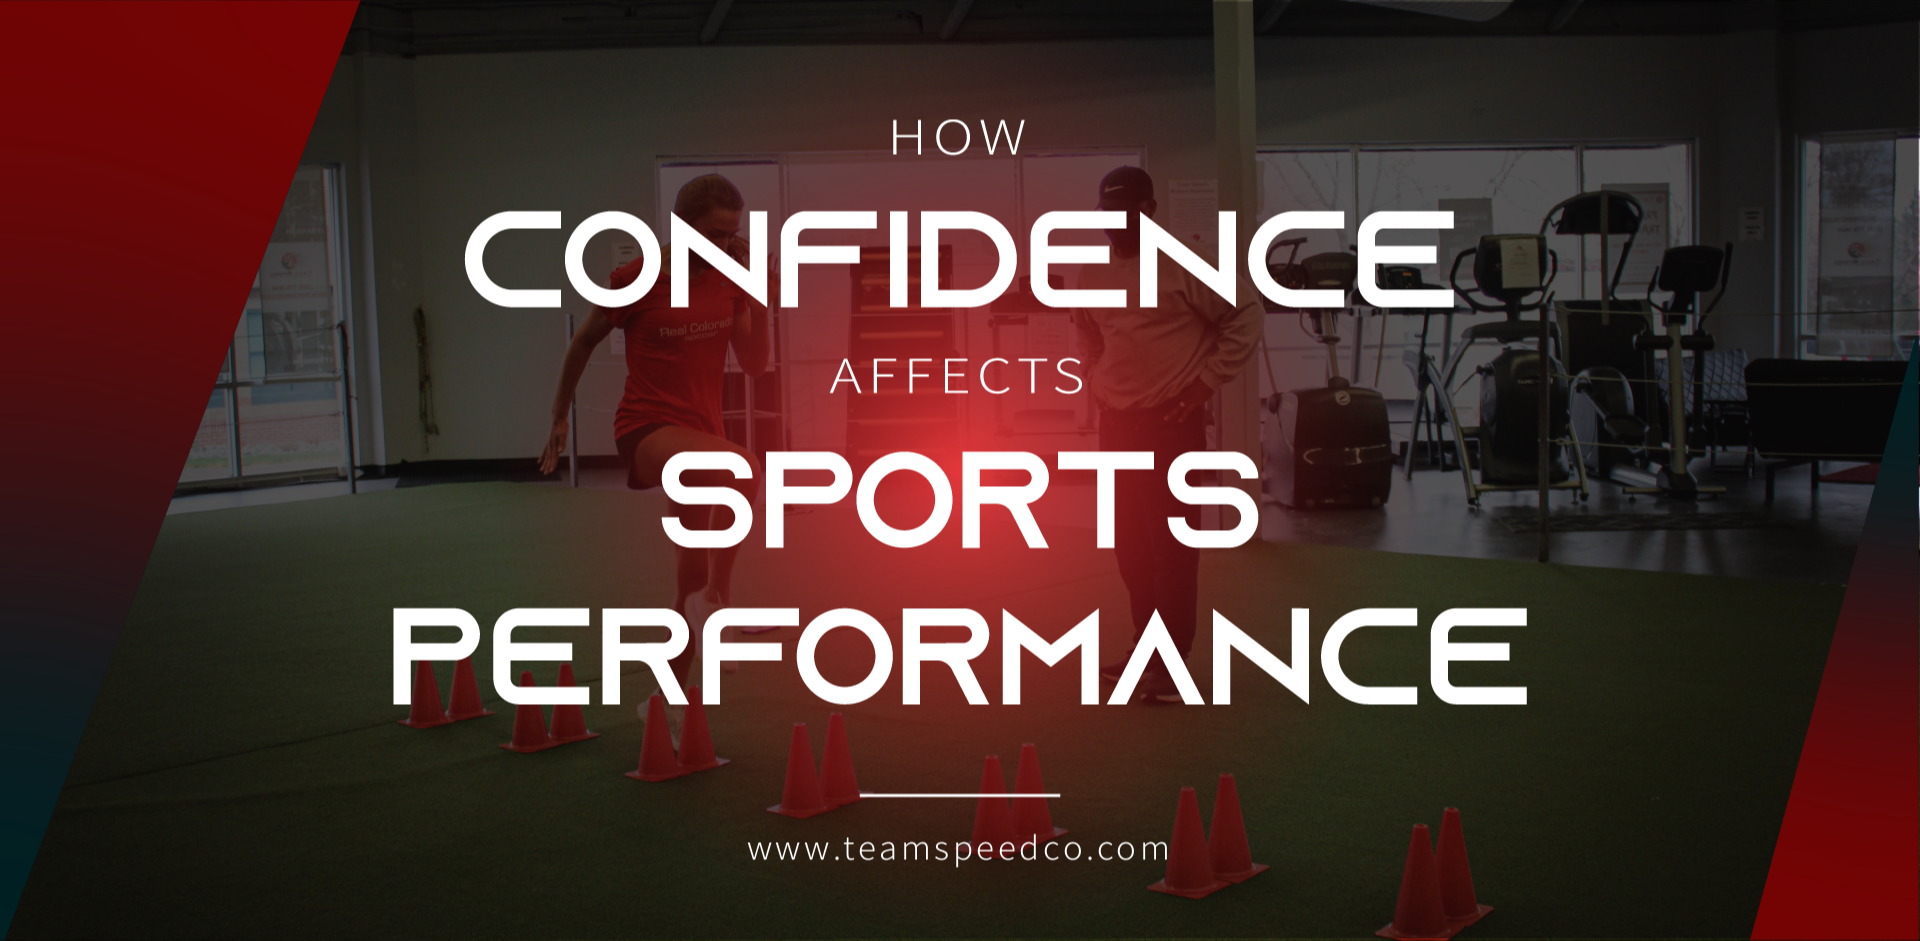 
How Confidence Affects Sports Performance